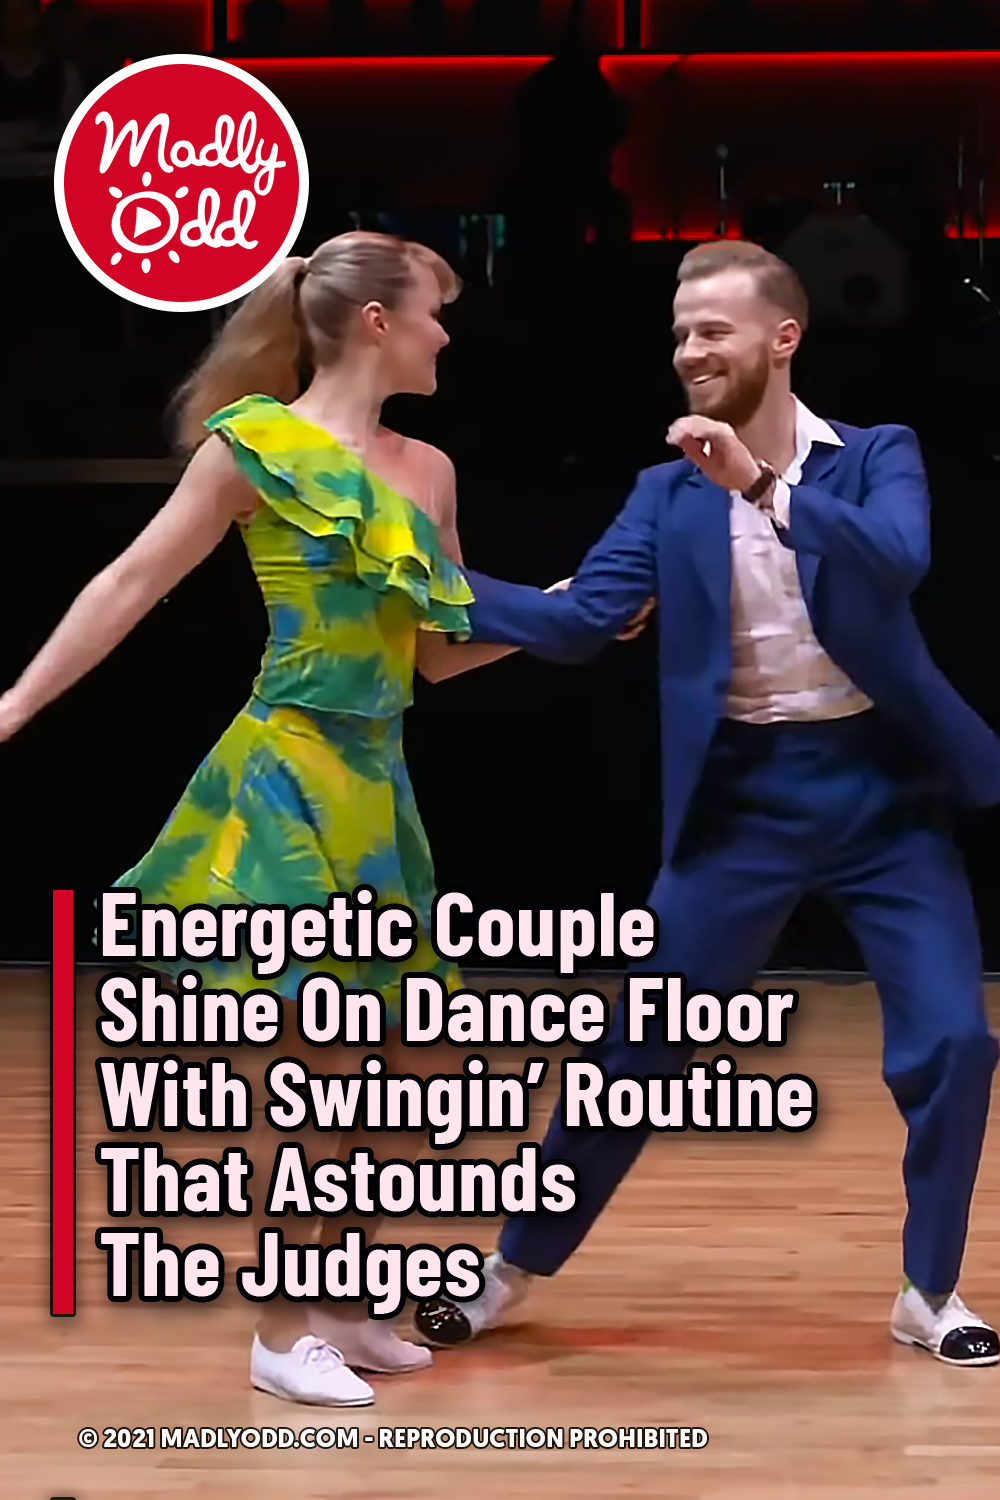 Energetic Couple Shine On Dance Floor With Swingin’ Routine That Astounds The Judges